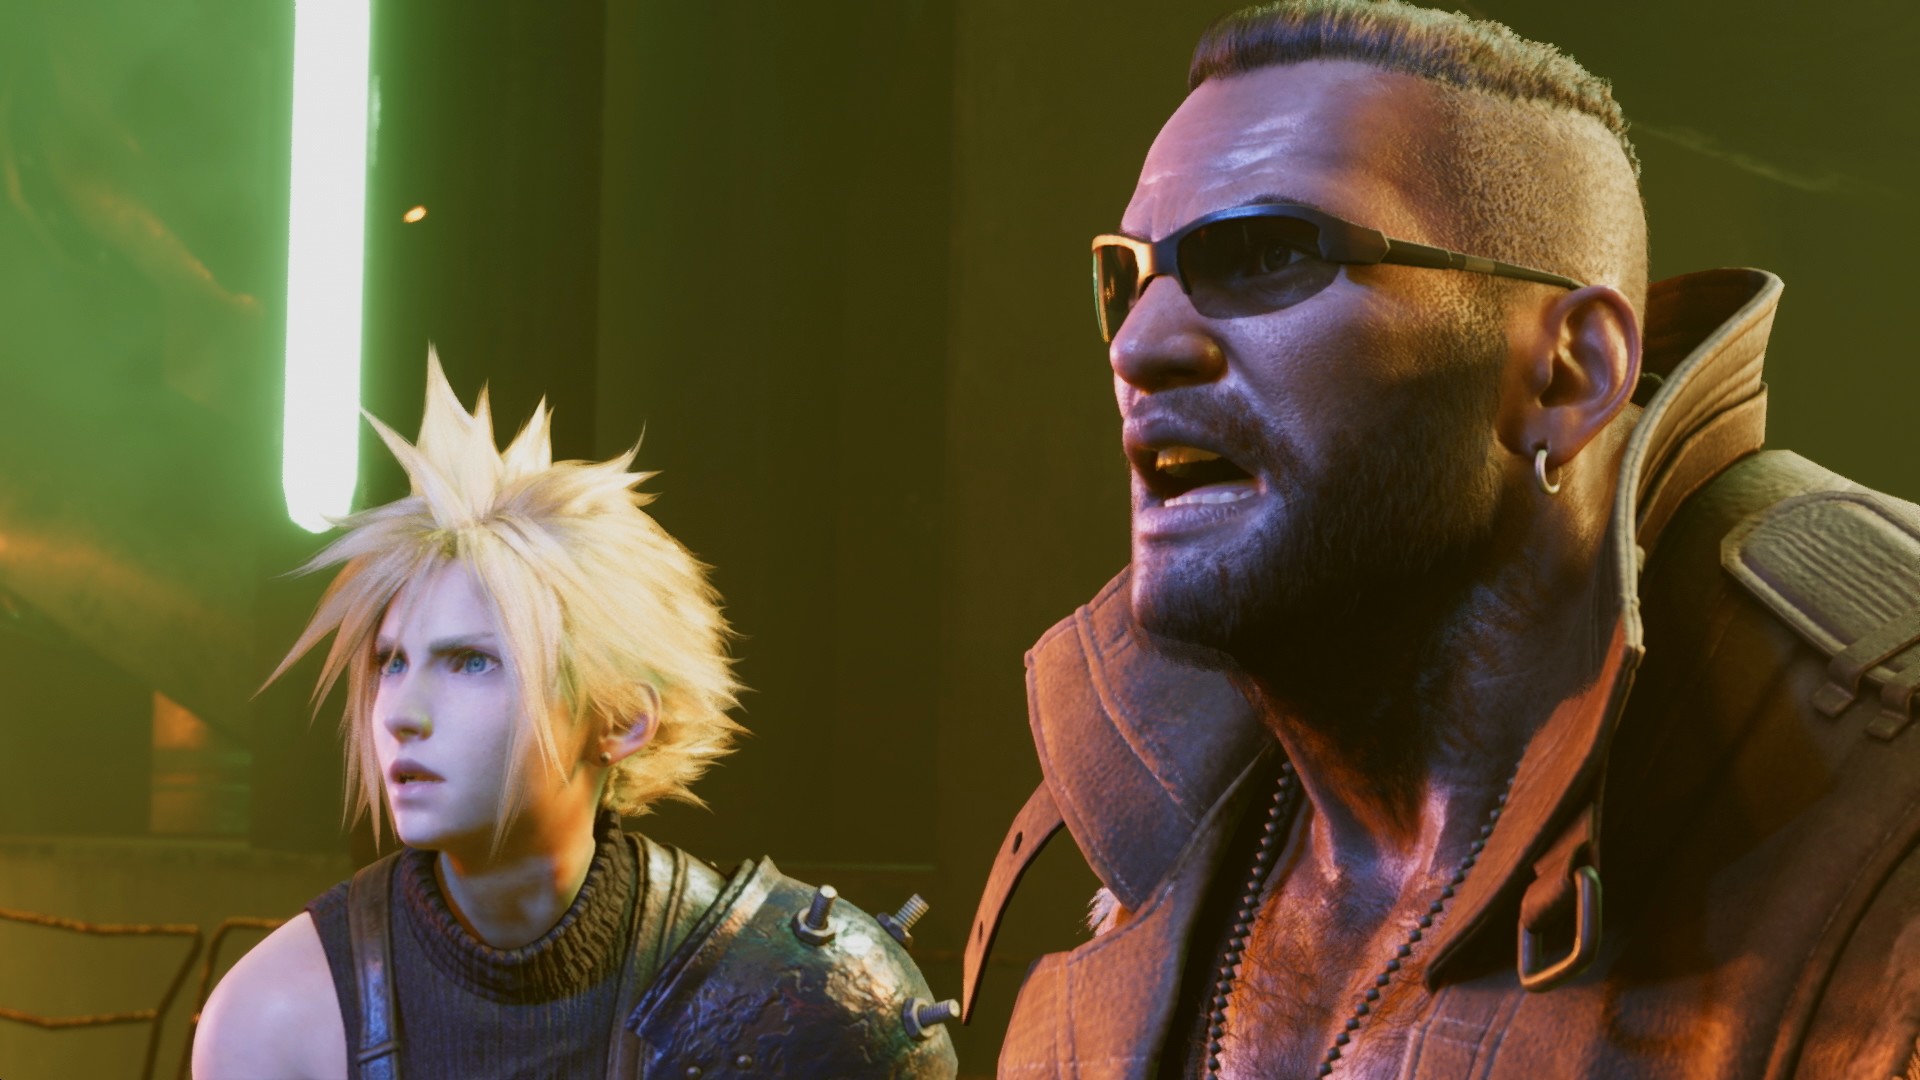 FF7, Final Fantasy 7 Remake, FF 7 Remake, Final Fantasy, Final Fantasy VII Remake, Square Enix, PS4, PlayStation 4, release date, gameplay, features, price, pre-order, Japan, Europe, US, North America, Australia